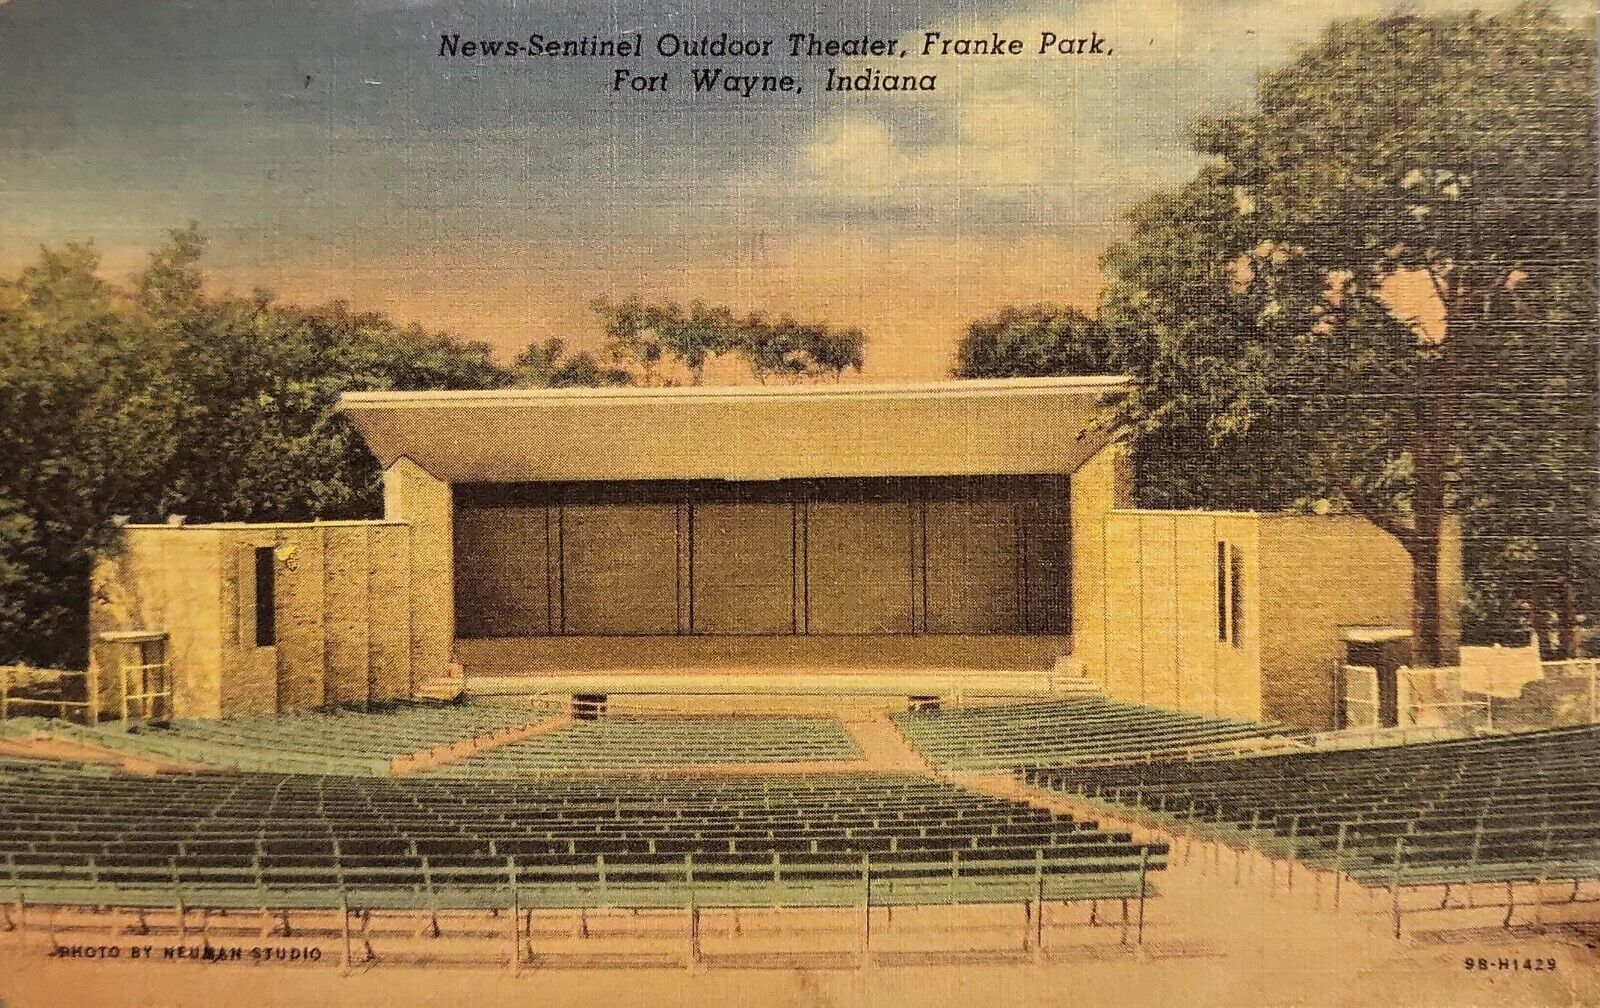 Fort Wayne Indiana - Vintage Postcard - News-Sentinel Outdoor Theater - Posted